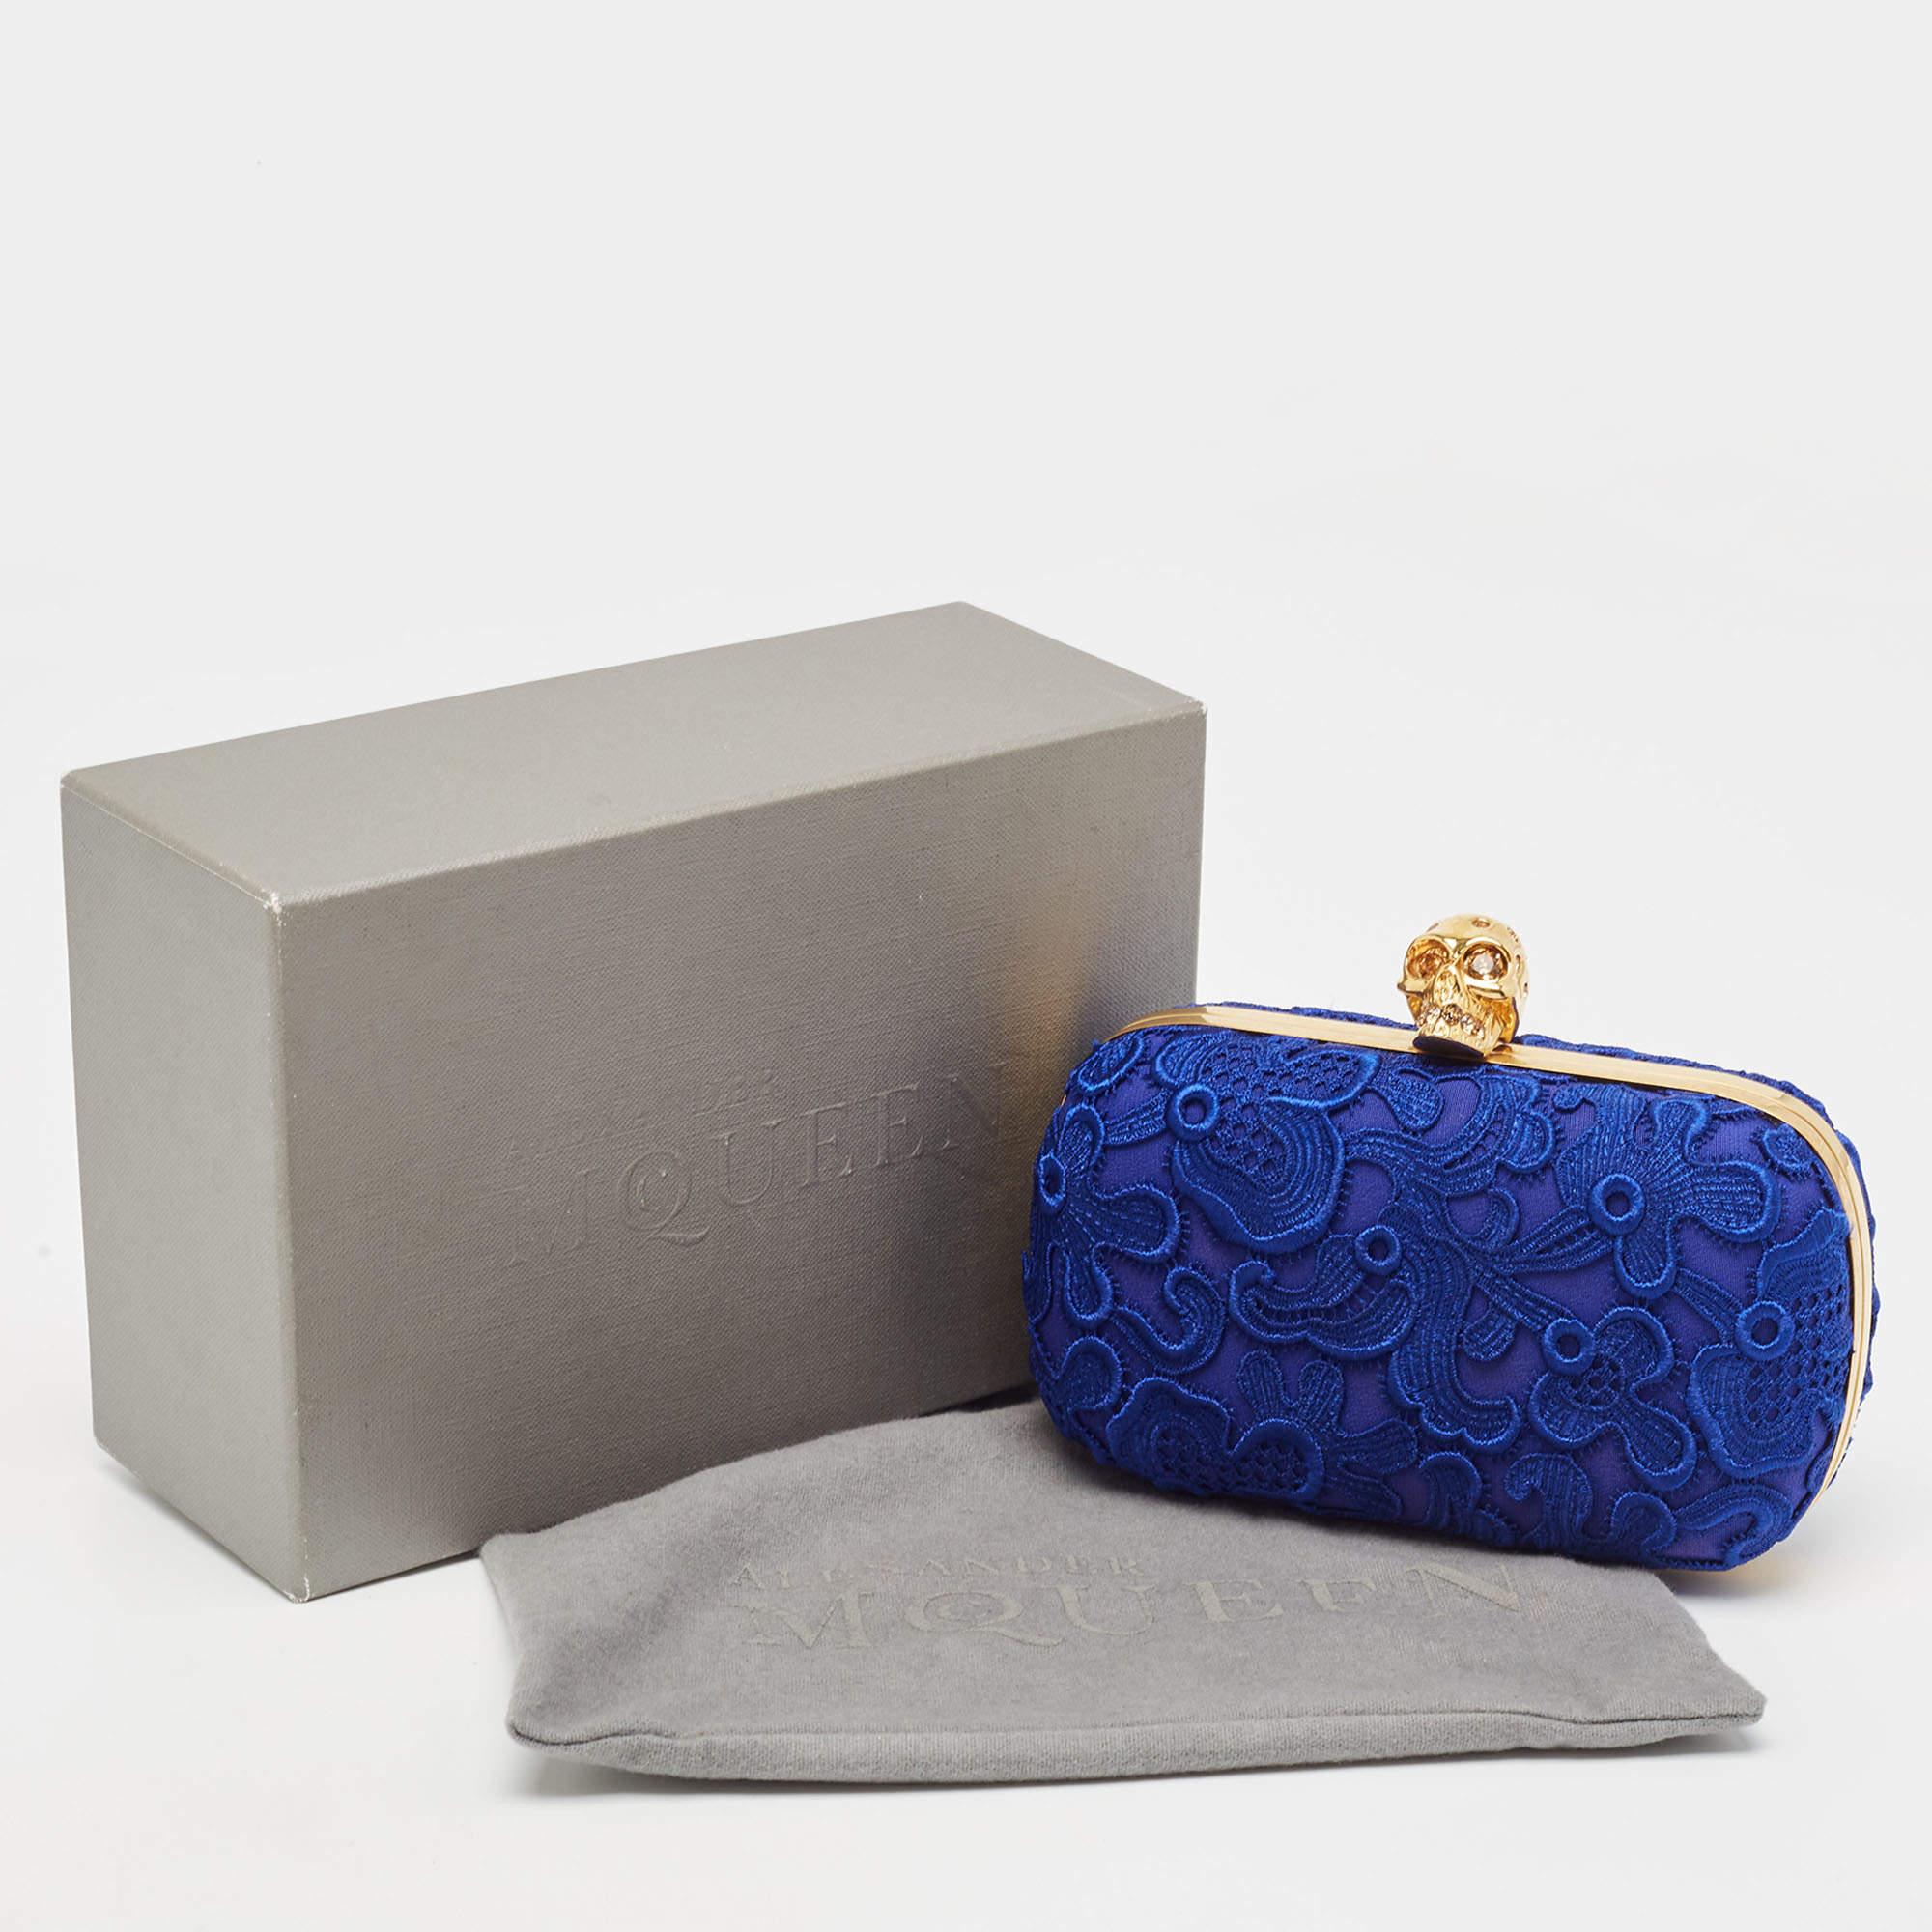 Alexander McQueen Blue Floral Lace Skull Box Clutch For Sale 7